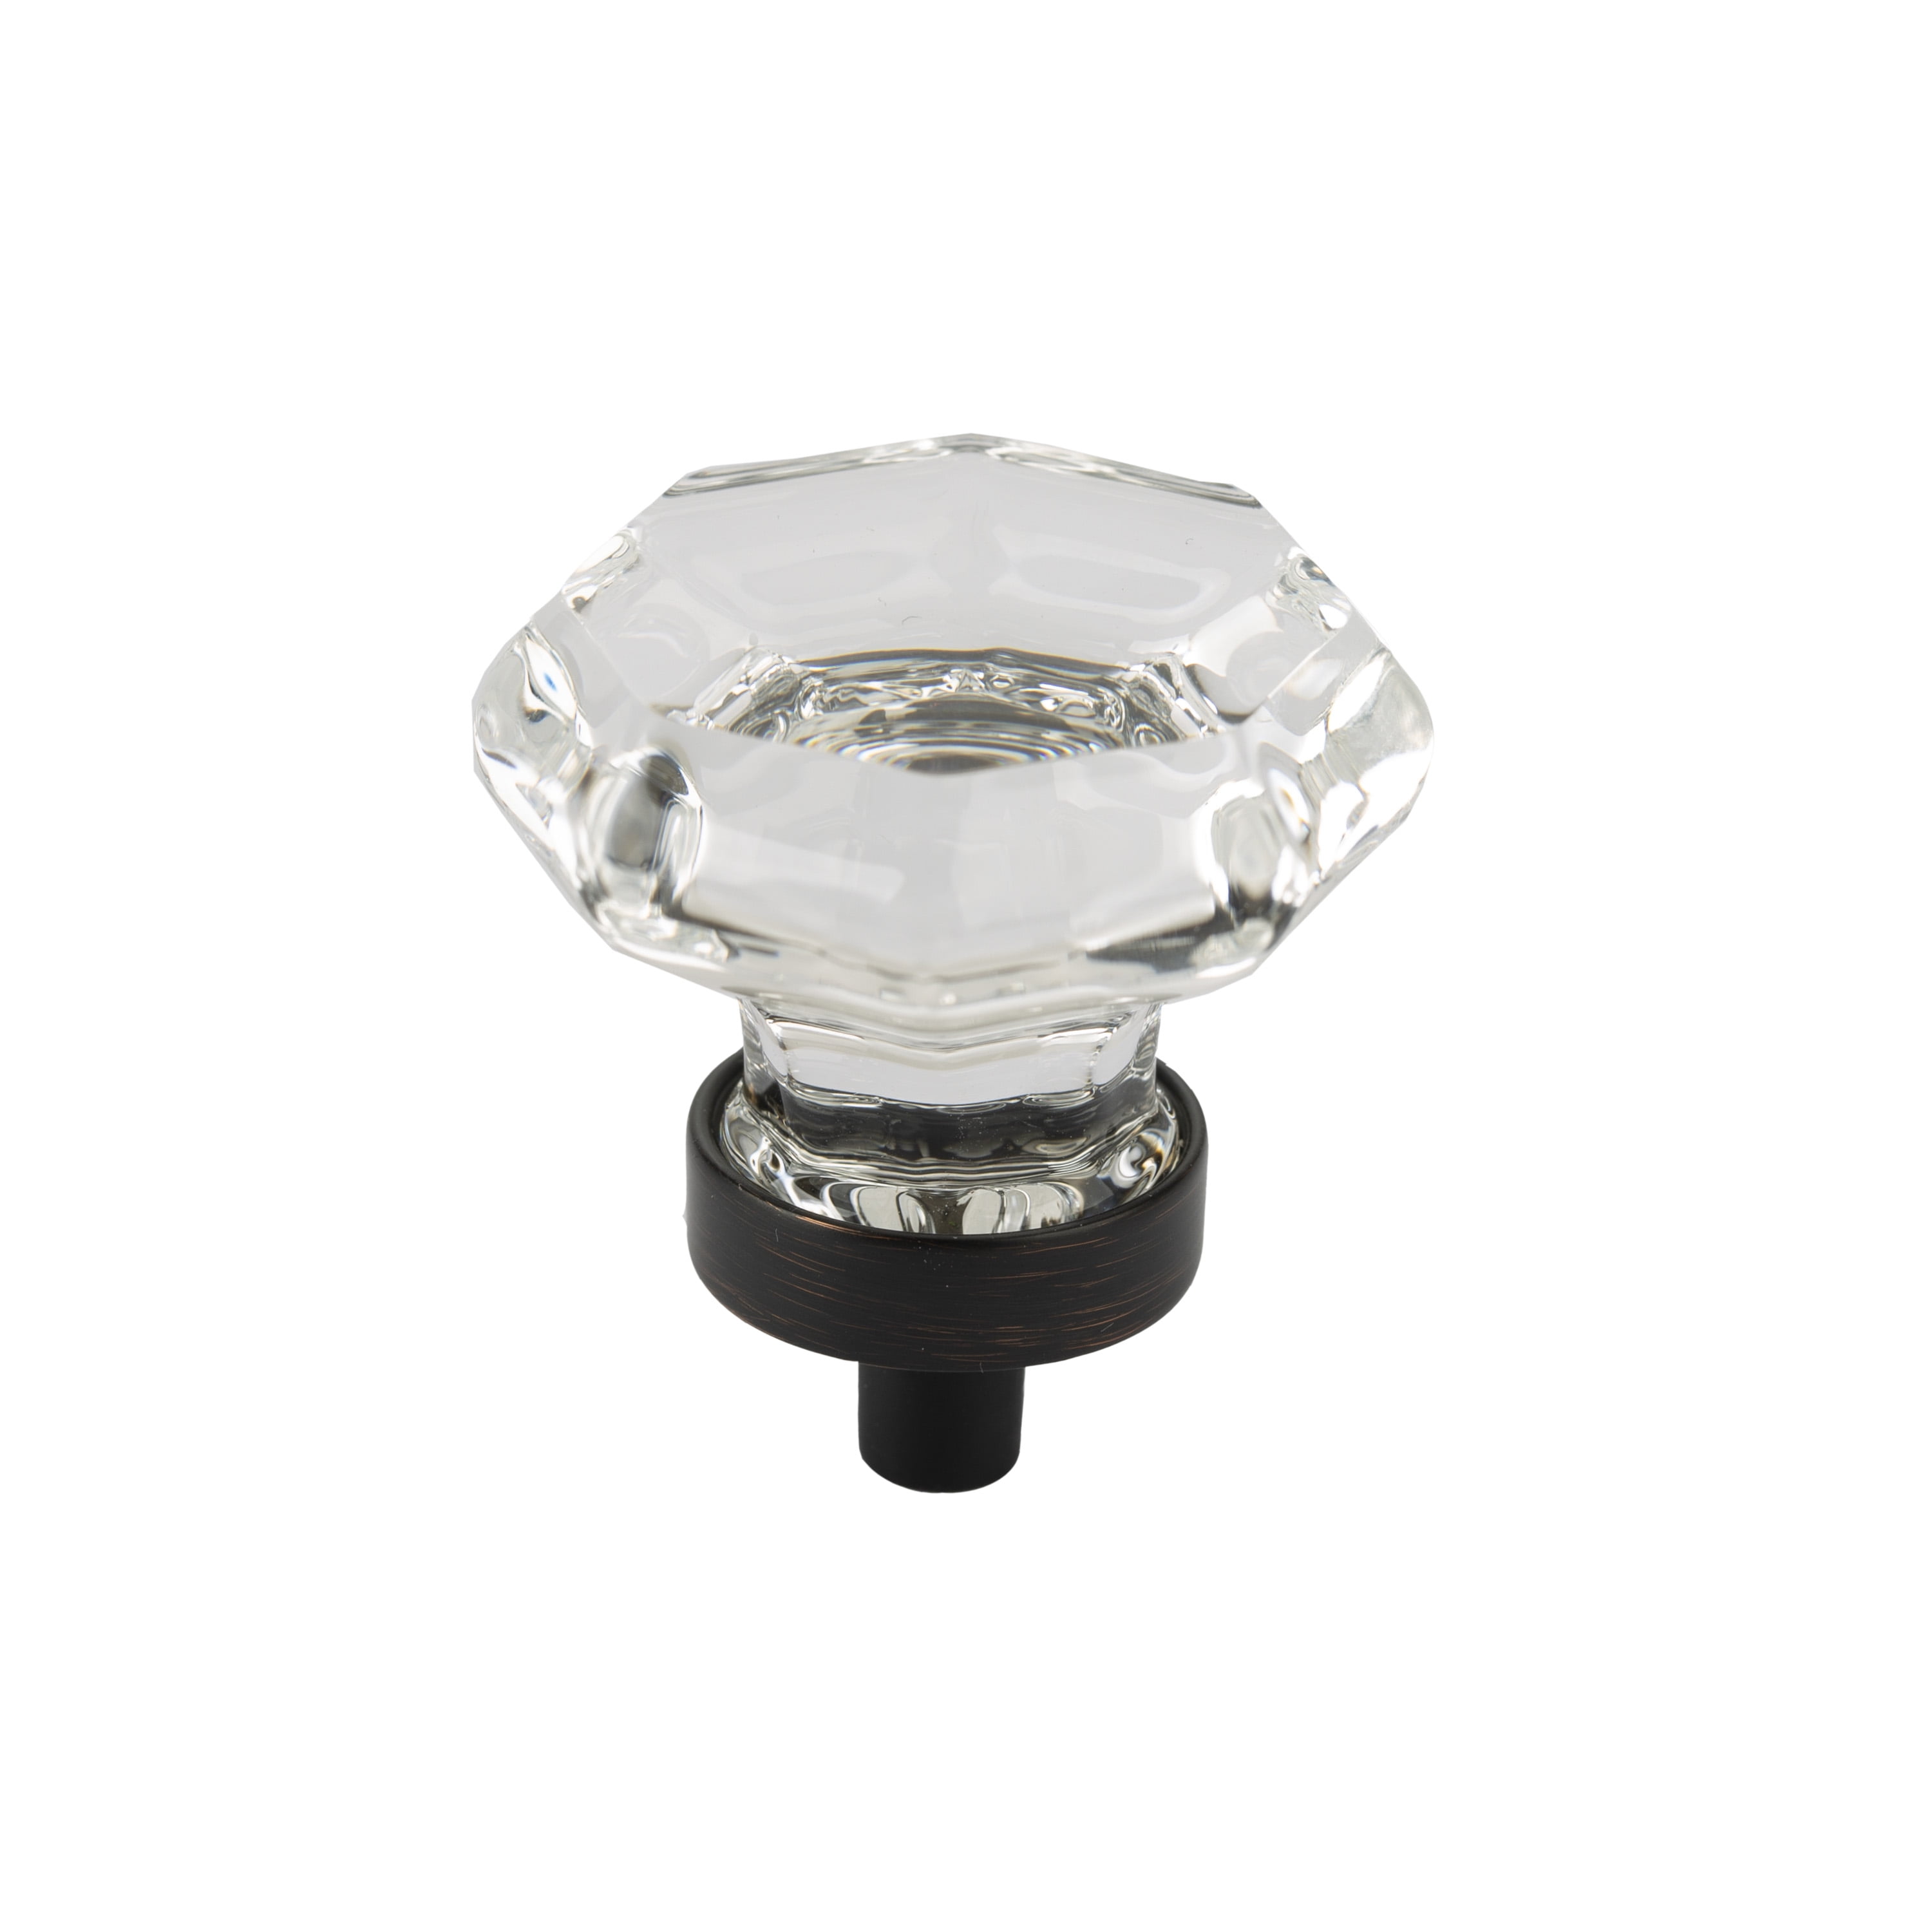 Better Homes & Gardens 1-7/16" (36mm) Clear Glass Geometric Knob, Oil Rubbed Bronze, 2 Pack